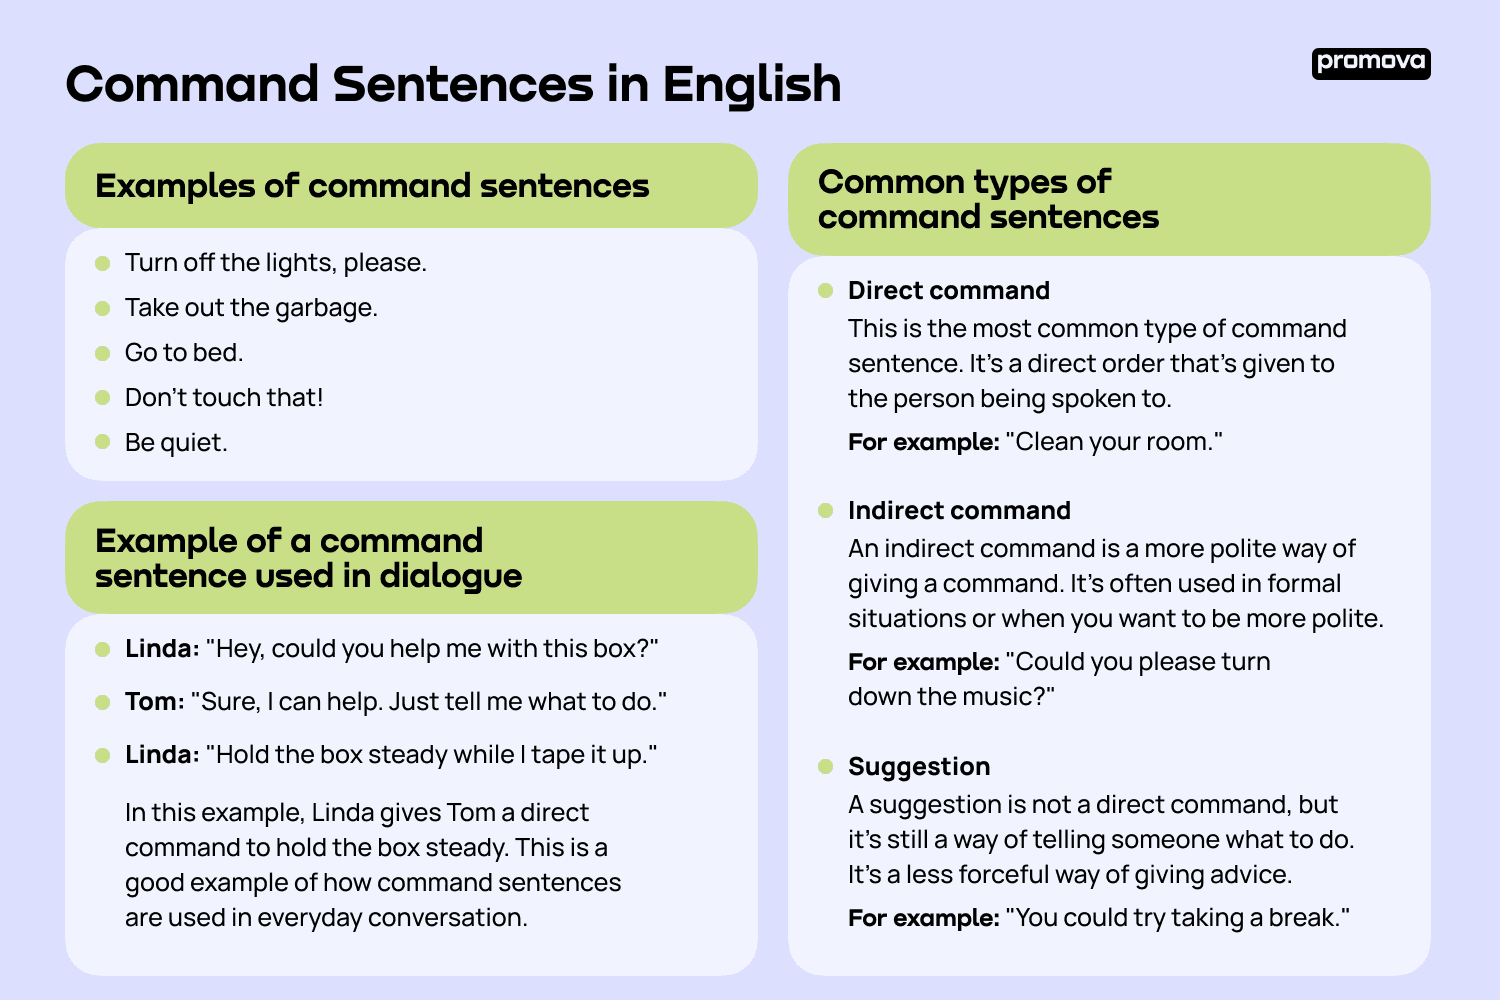 Examples of command sentences